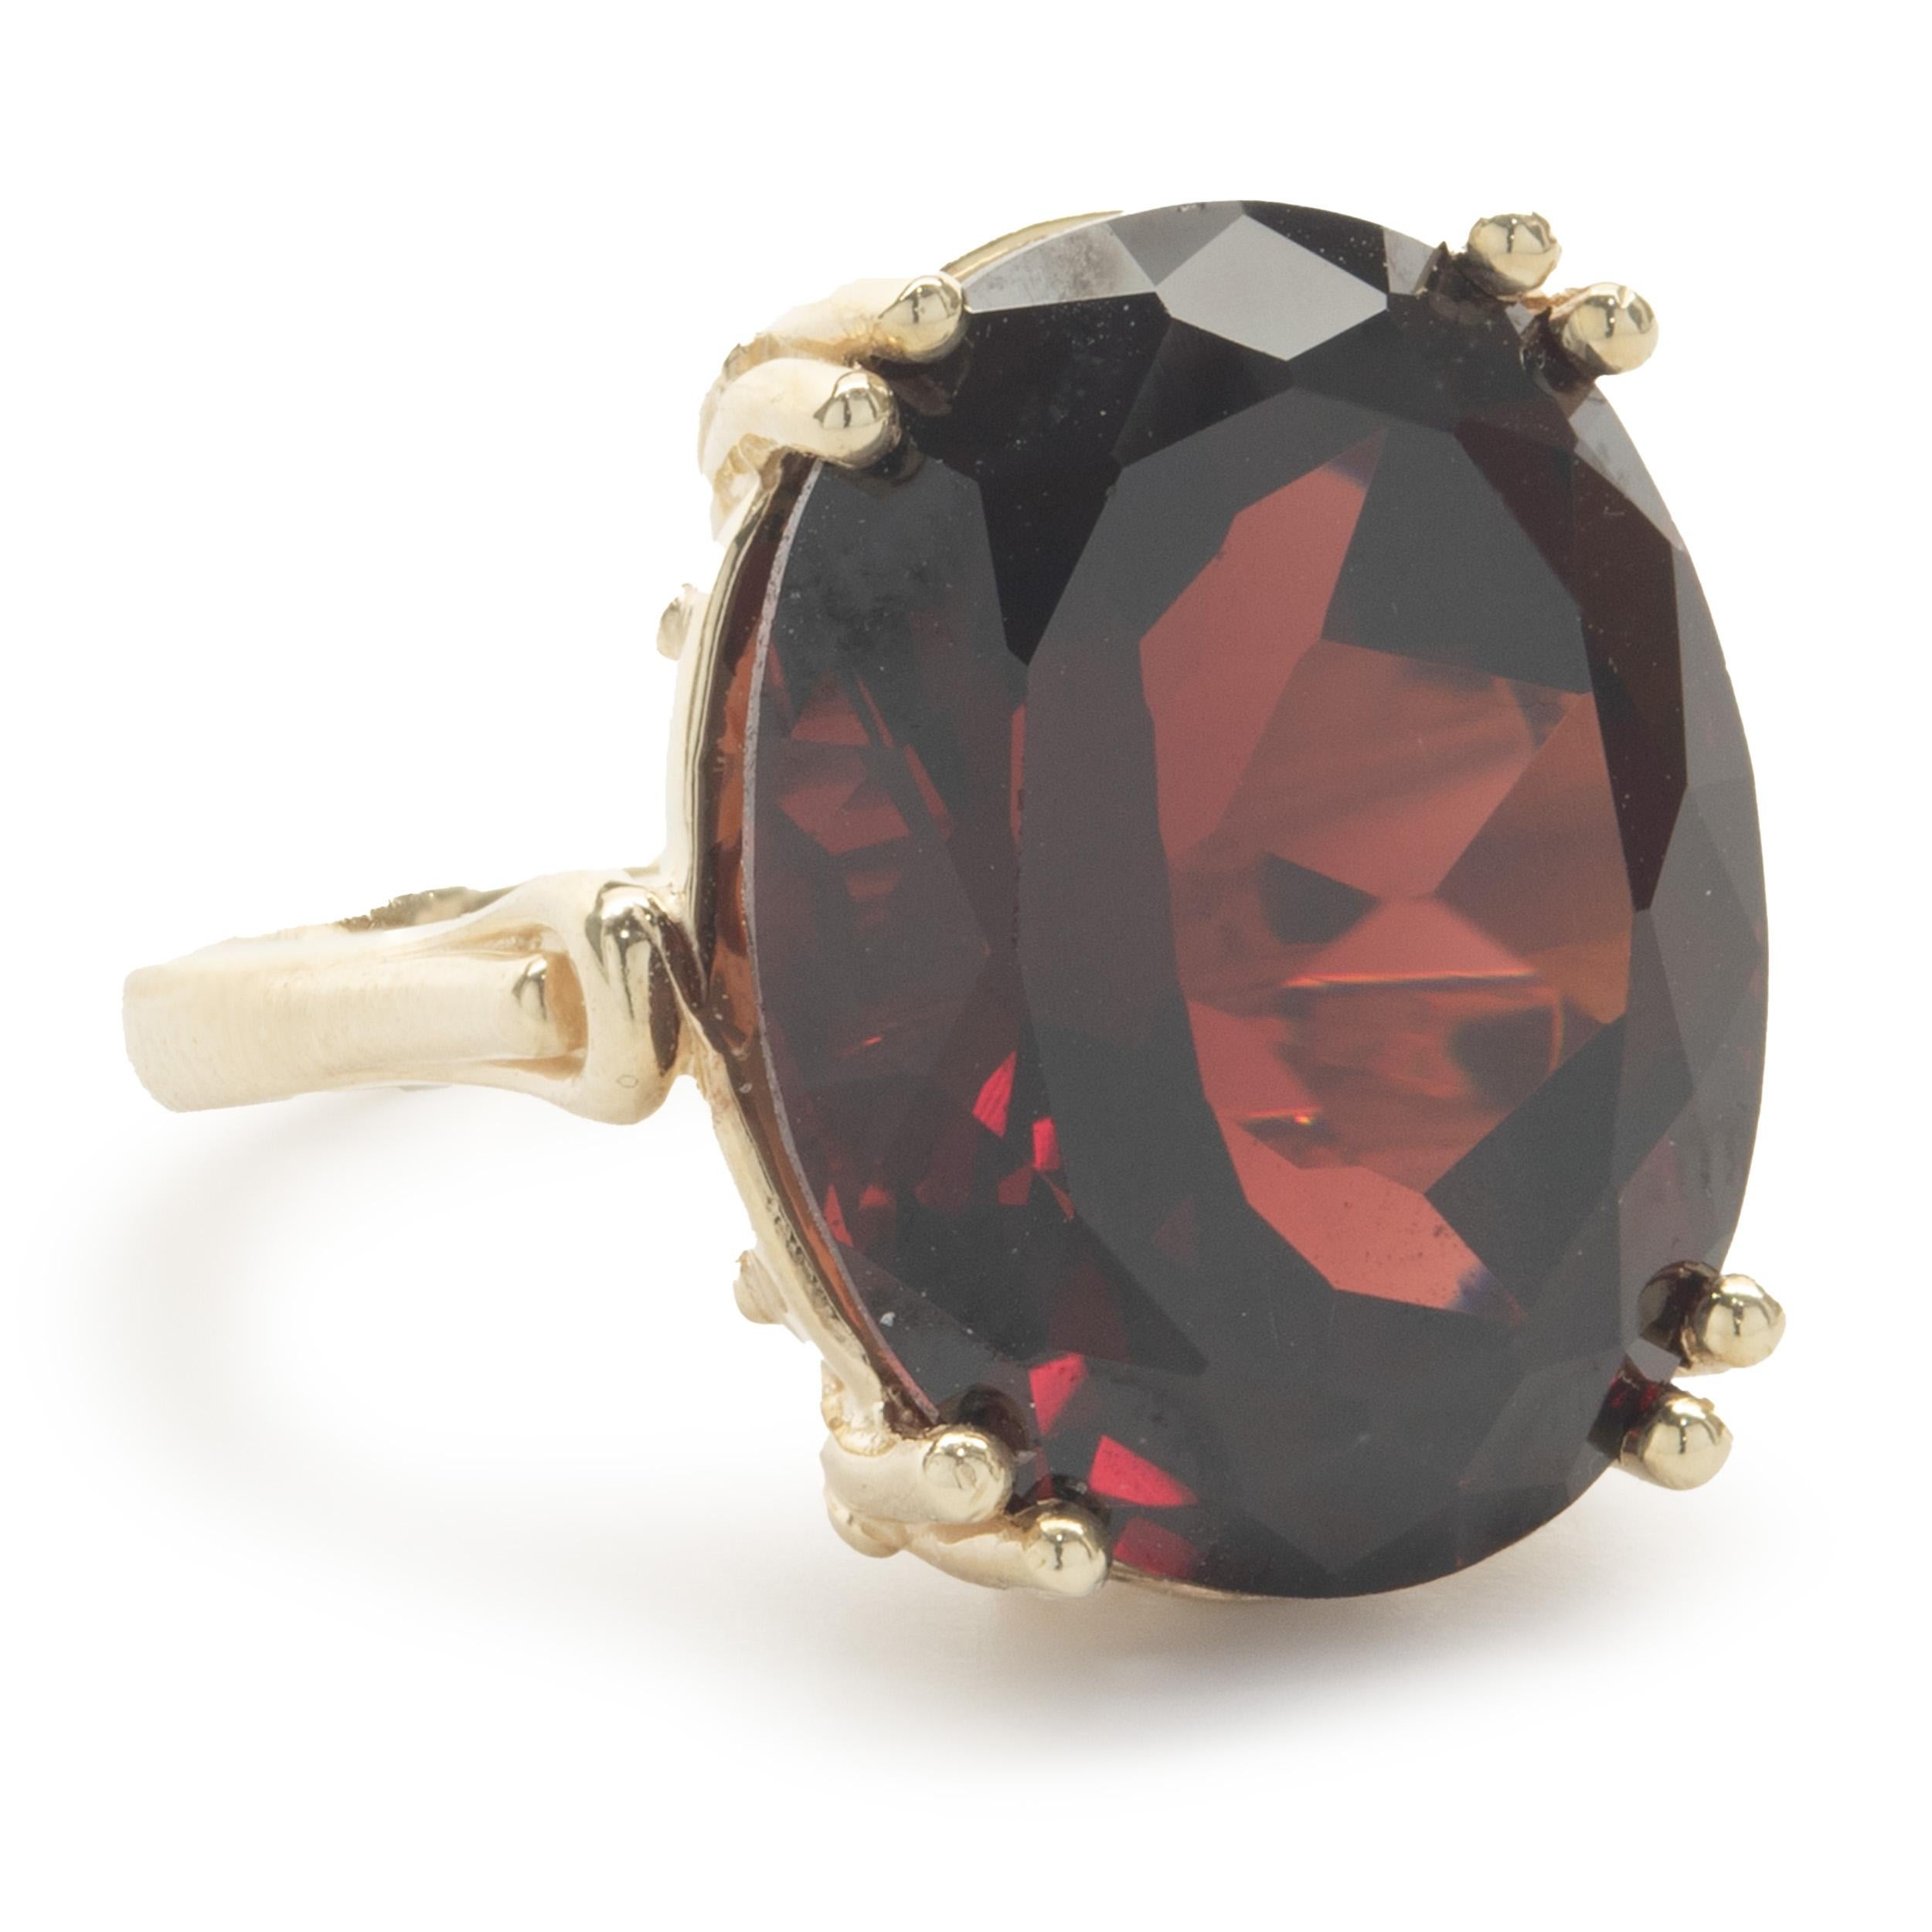 Designer: custom
Material: 14K yellow gold
Garnet: 1 oval cut = 22.35ct
Dimensions: ring top measures 19.25mm wide
Ring Size: 6.5 (complimentary sizing available)
Weight: 12.31 grams